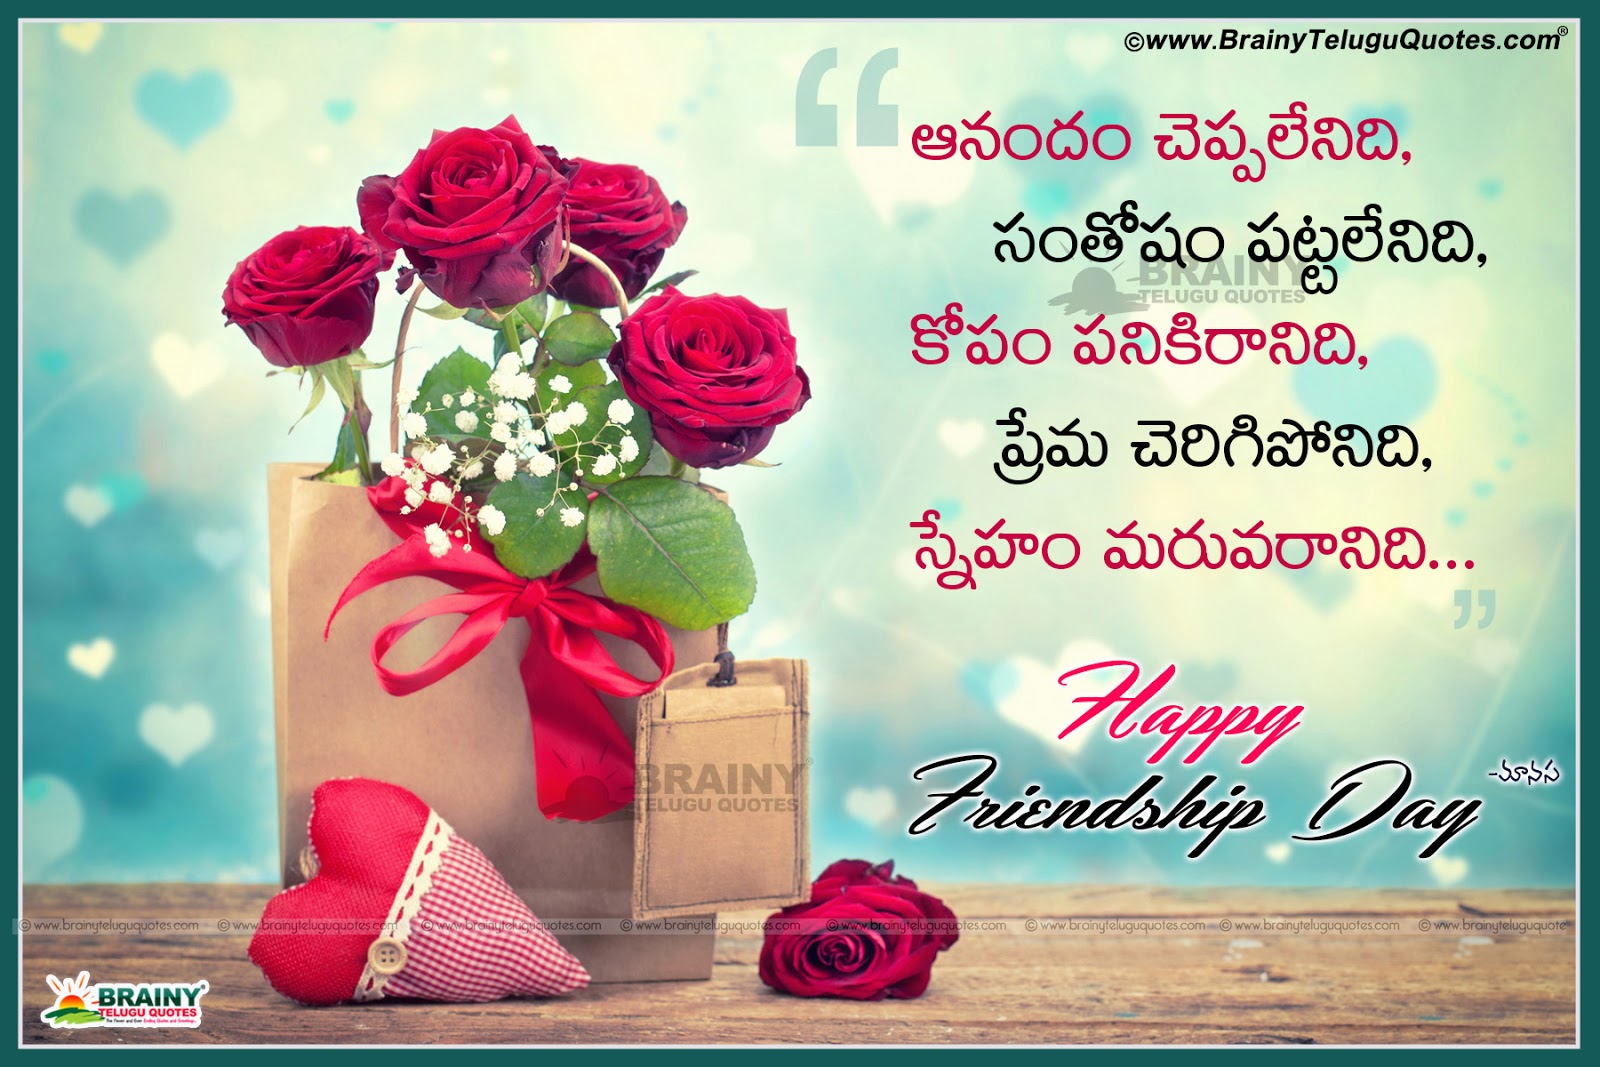 Here Is Best Friendship Day Quotes In Telugu, Friendship - Friendship Day Quotations In Telugu - HD Wallpaper 